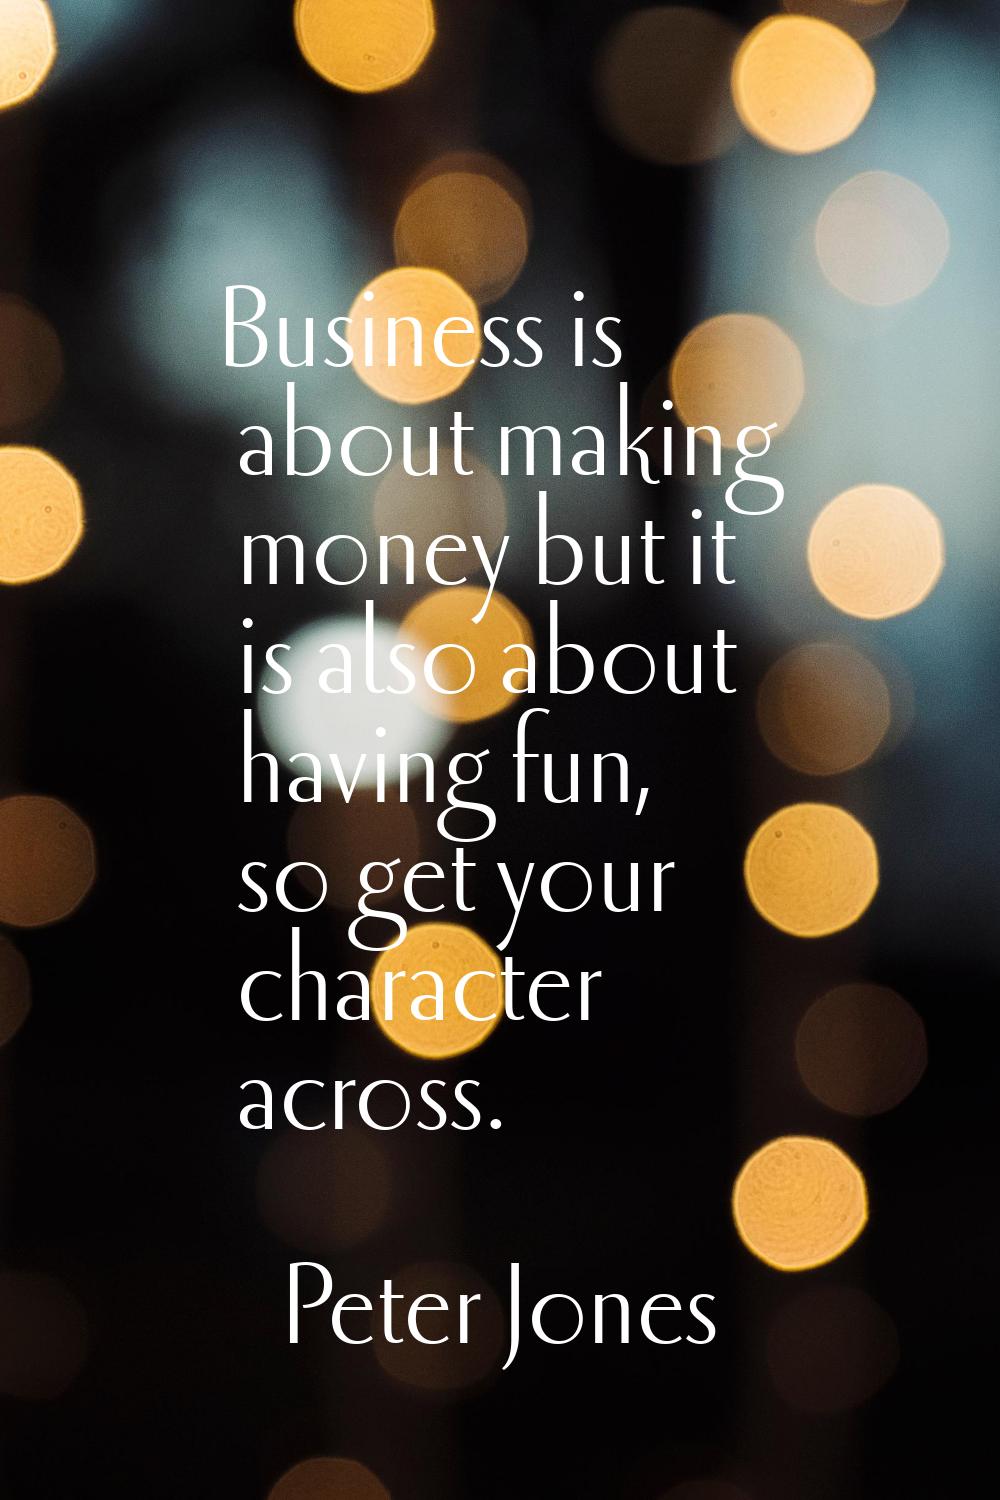 Business is about making money but it is also about having fun, so get your character across.